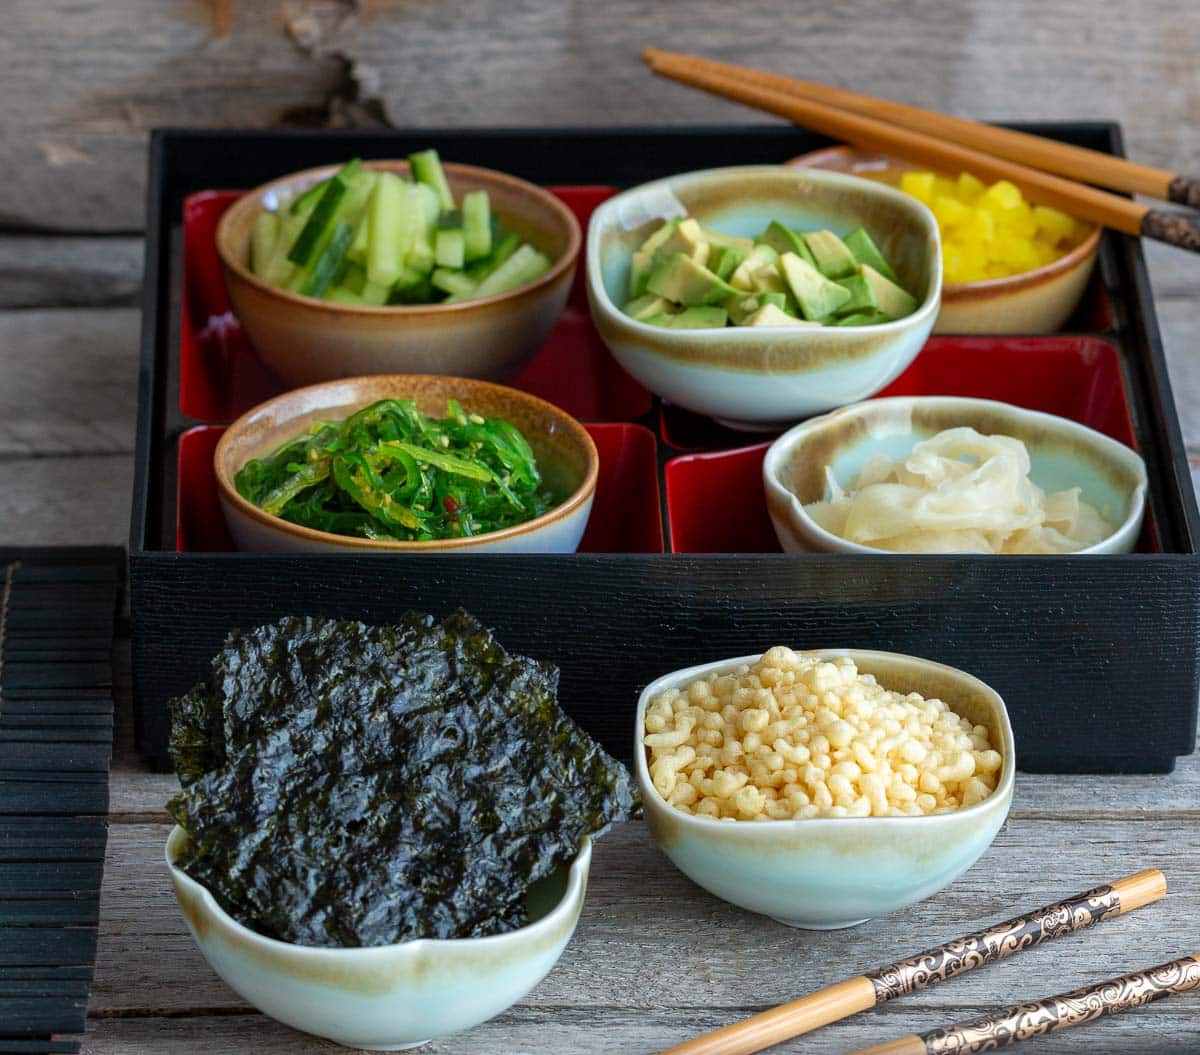 Fun toppings for sushi bake like Japanese pickles, avocado, cucumbers and more.